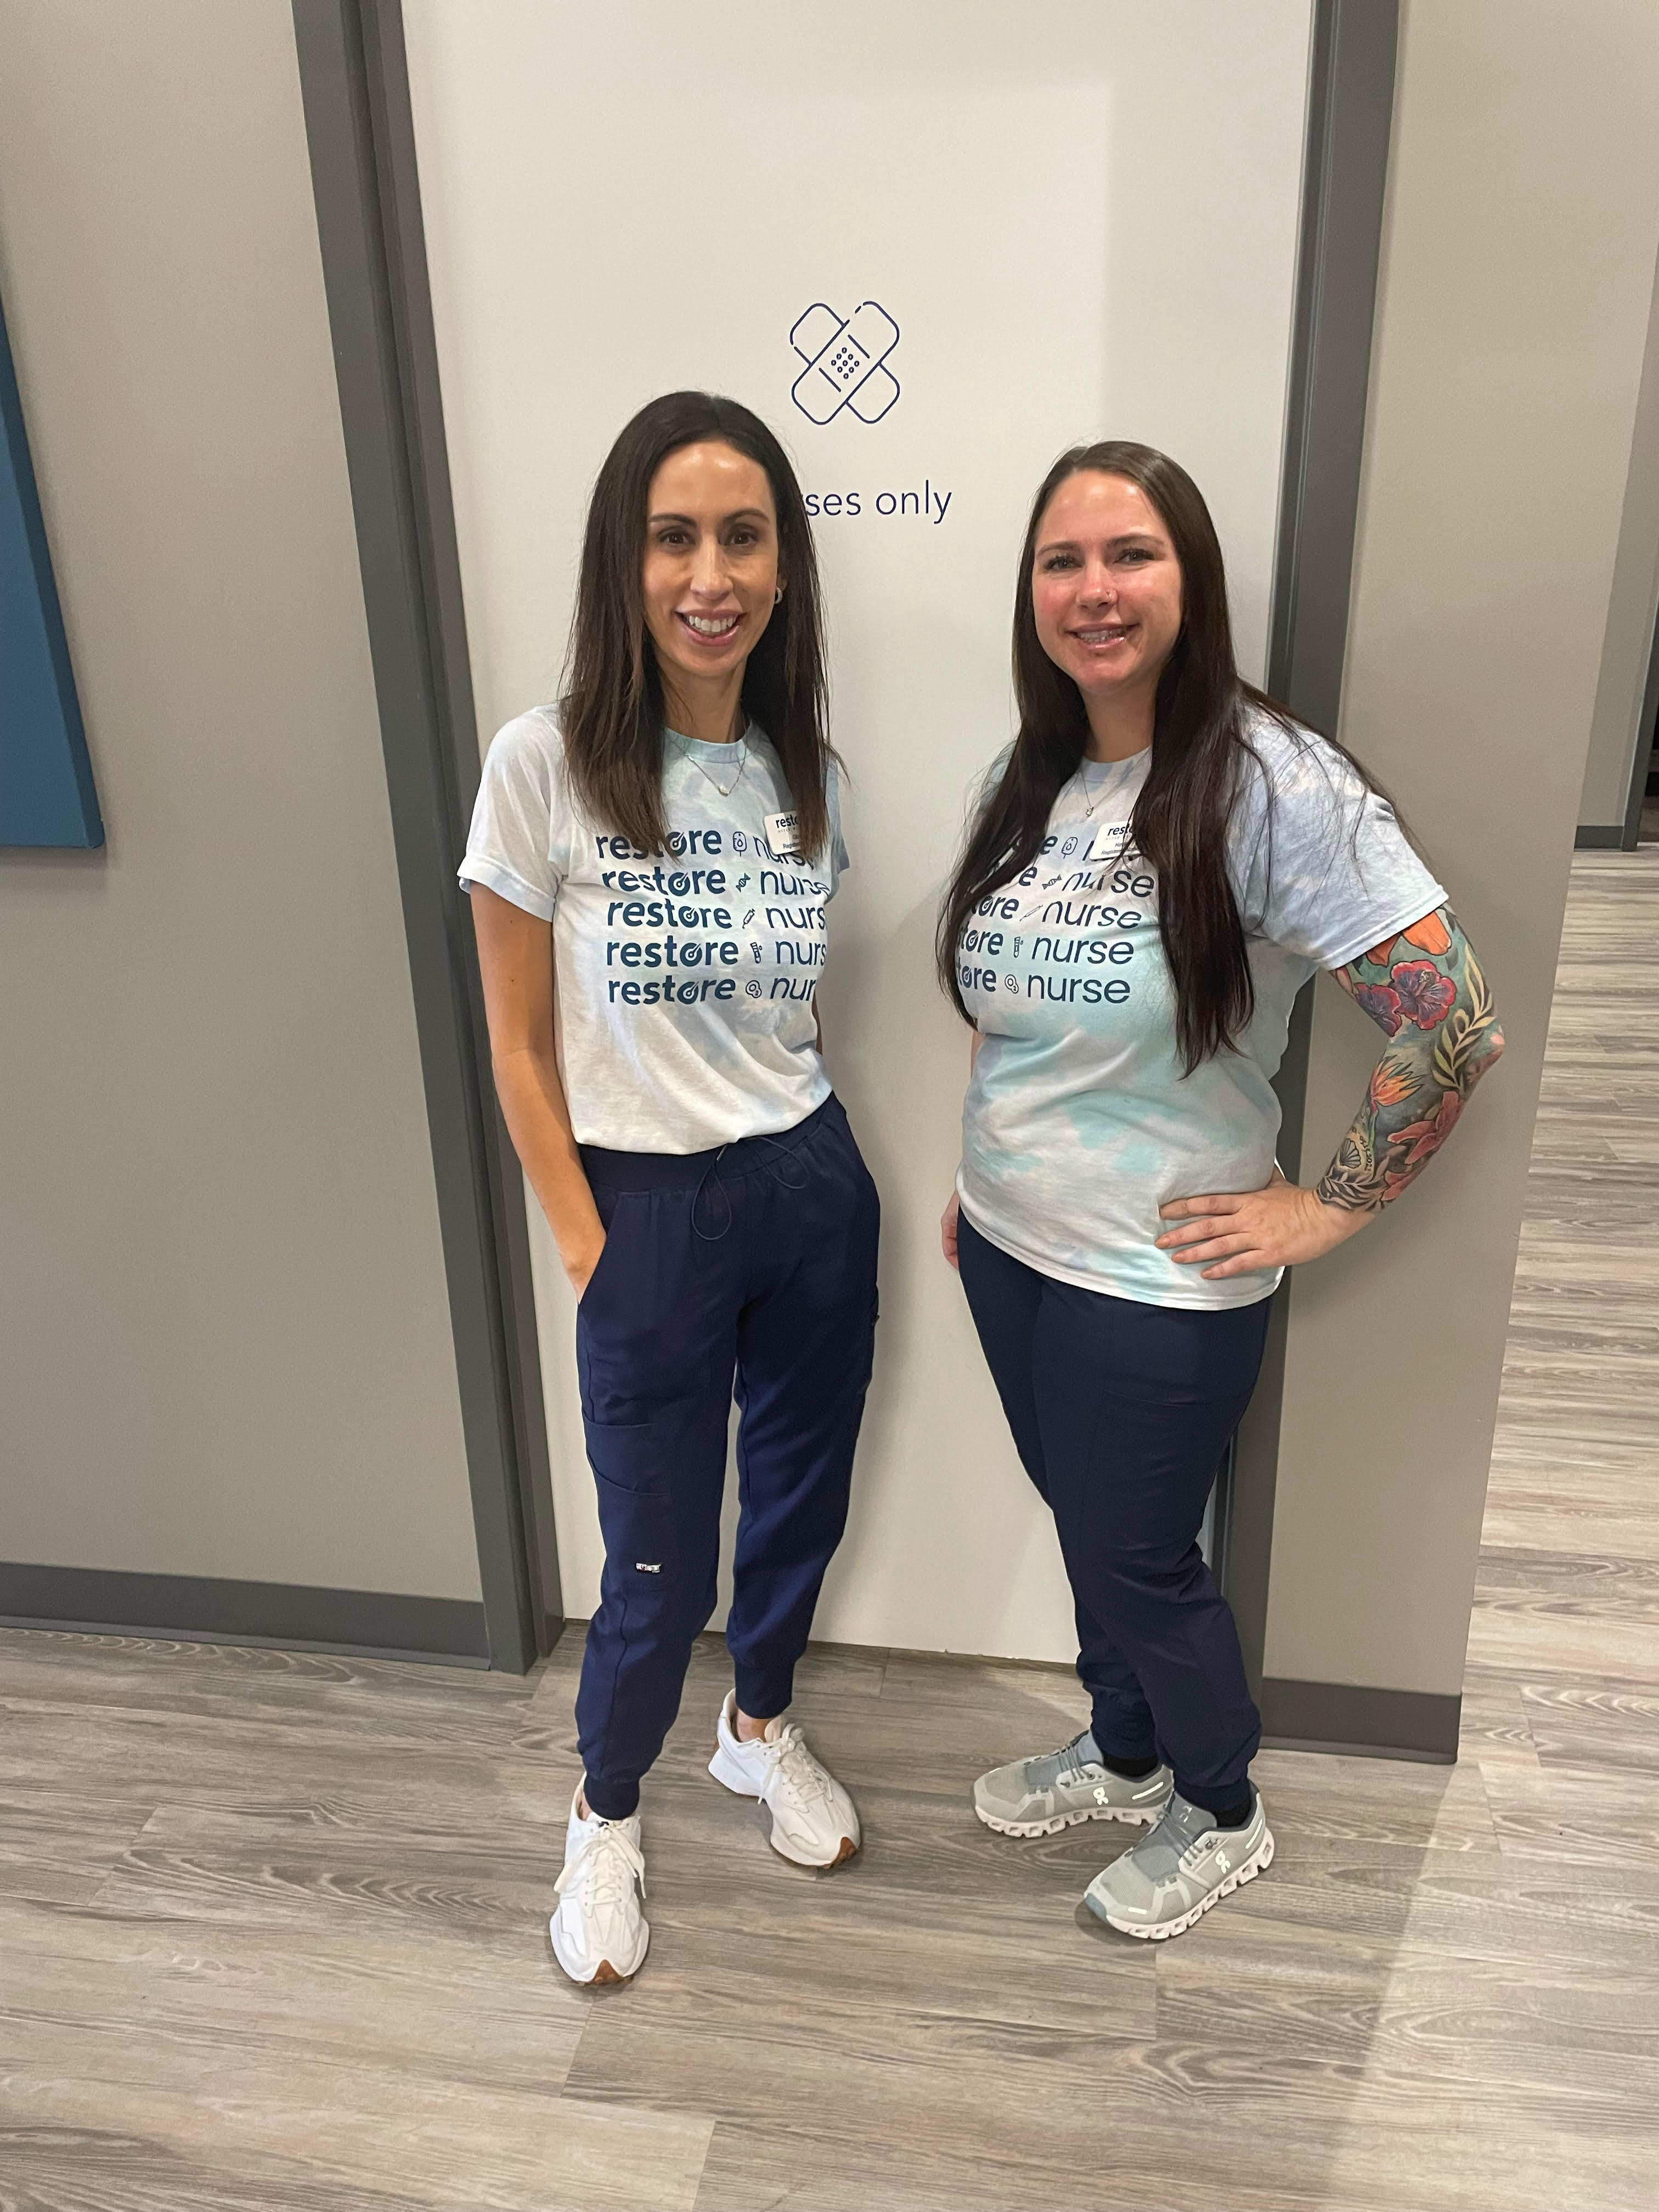 Our team of nurses are always here to recommend an IV drip or IM Shot to help achieve your wellness and recovery goals!